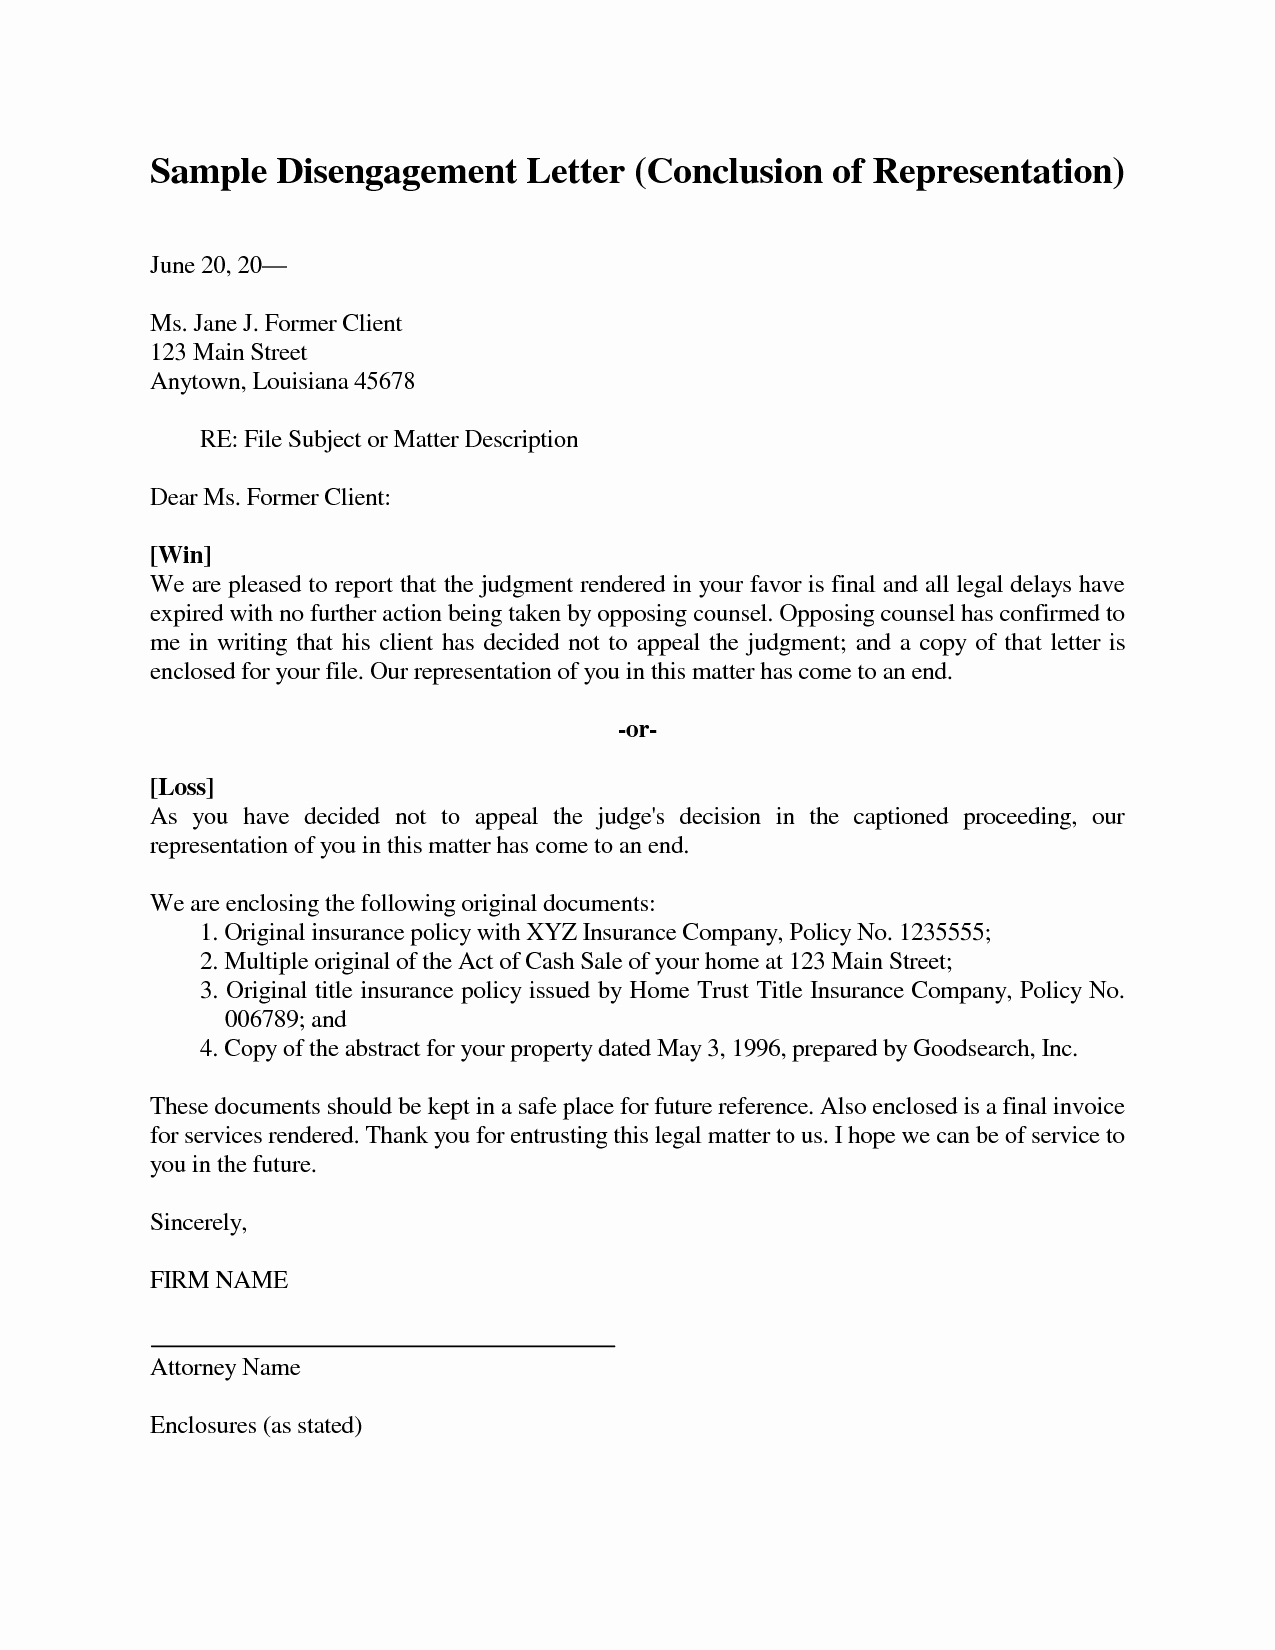 Attorney Letter Of Representation Sample New Sample Legal Representation Letter by Mlp Sample